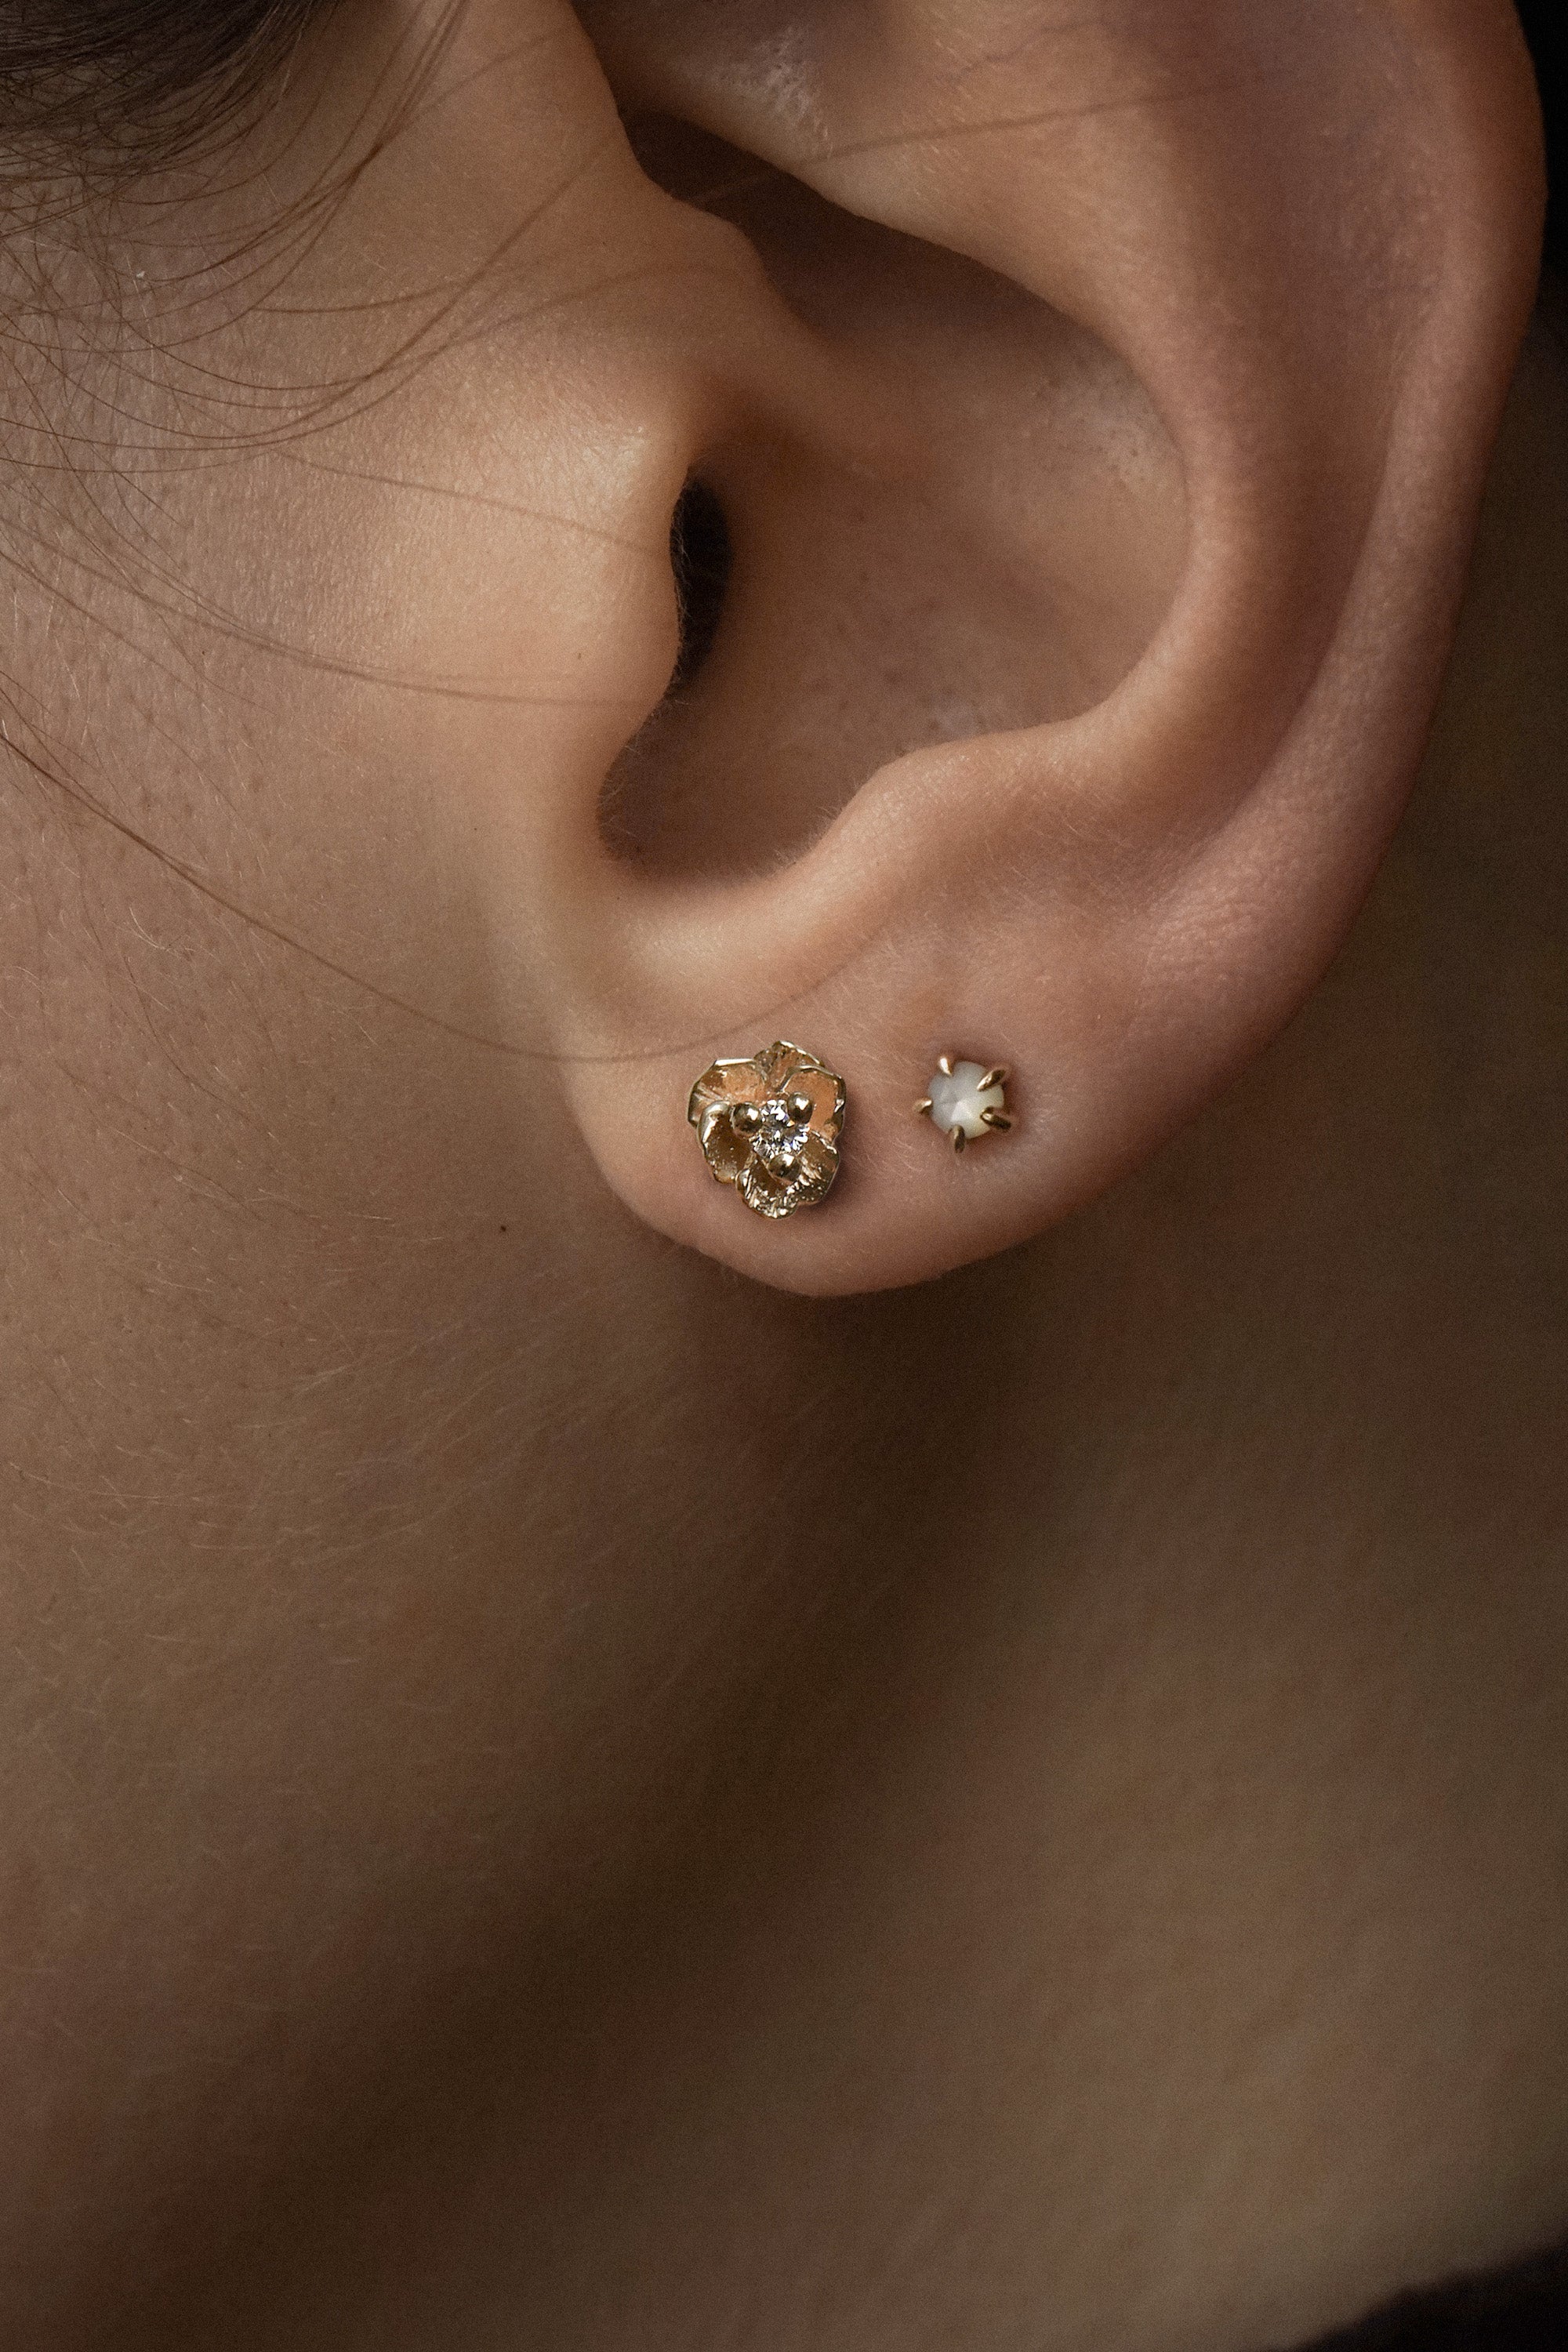 A close-up of an ear wearing two stud earrings by Laurie Fleming Jewellery. The model has tan skin and both earrings are in lobe piercings. The bottom piercing features a diamond Pansy stud, and the top piercing features a rose cut mother of pearl moondew stud.